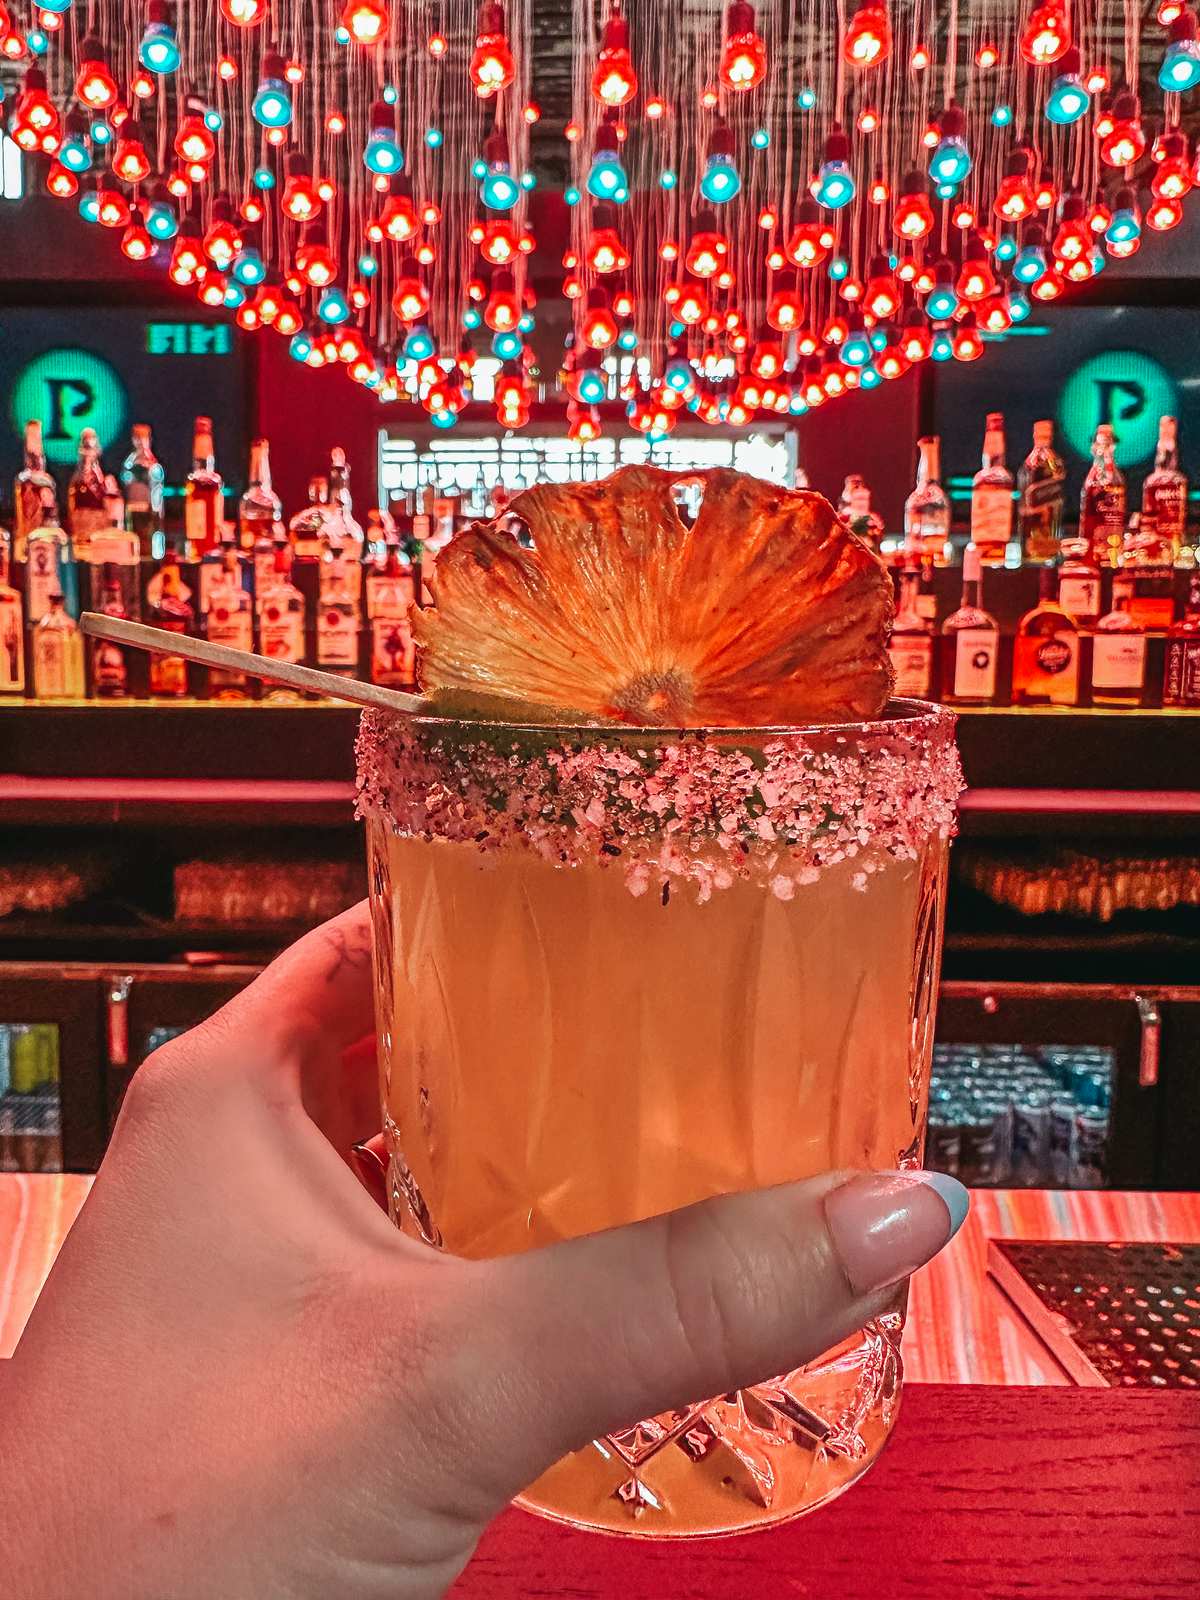 Mezcal cocktail from Puttshack in St. Louis